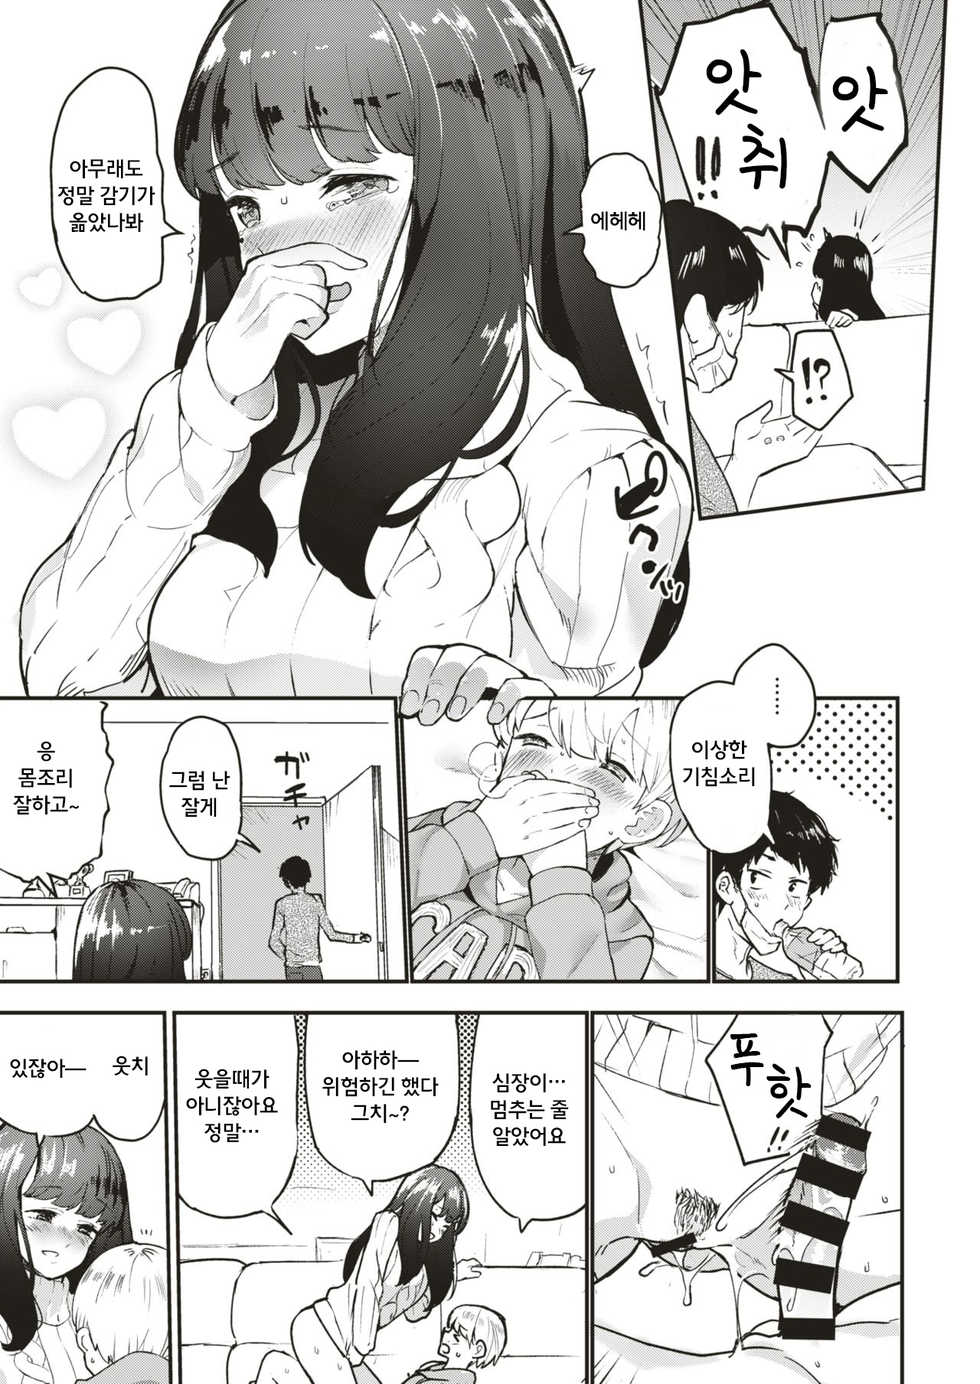 [ababari] Tomodachi no Onee-san - Your sister is fucking special | 친구의 누나 (COMIC X-EROS #79) [Korean] [Digital] - Page 17